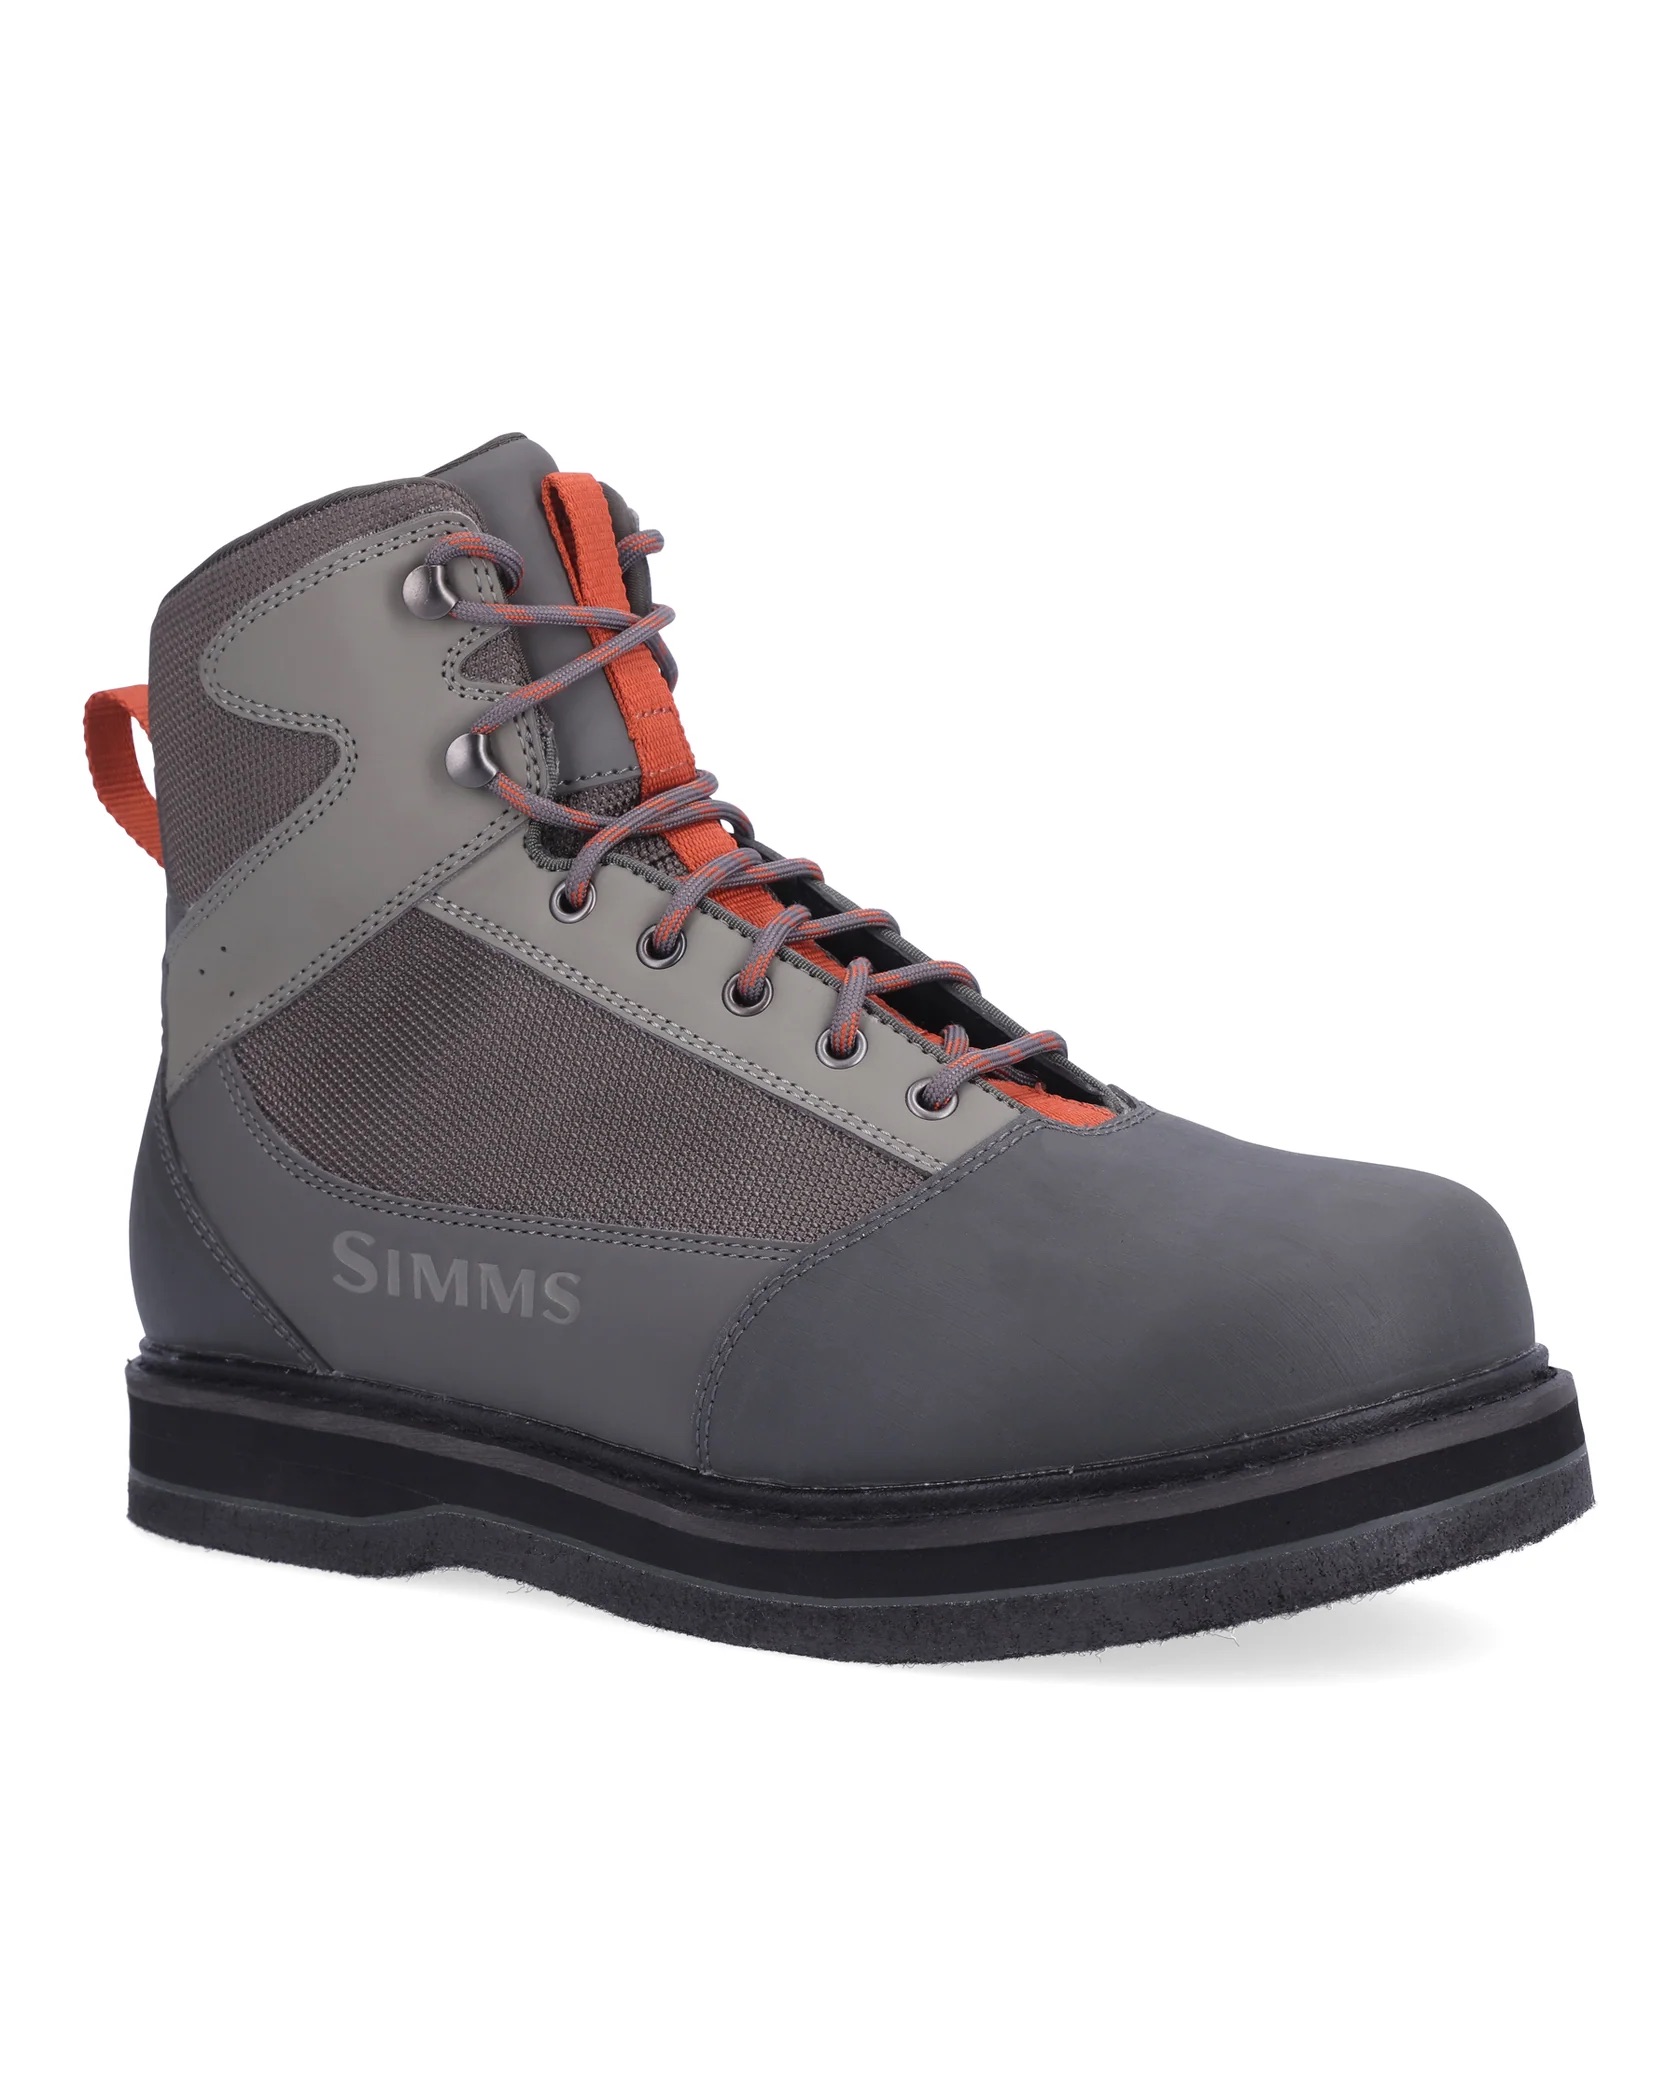 Simms Tributary Wading Boot - Felt - Size 14